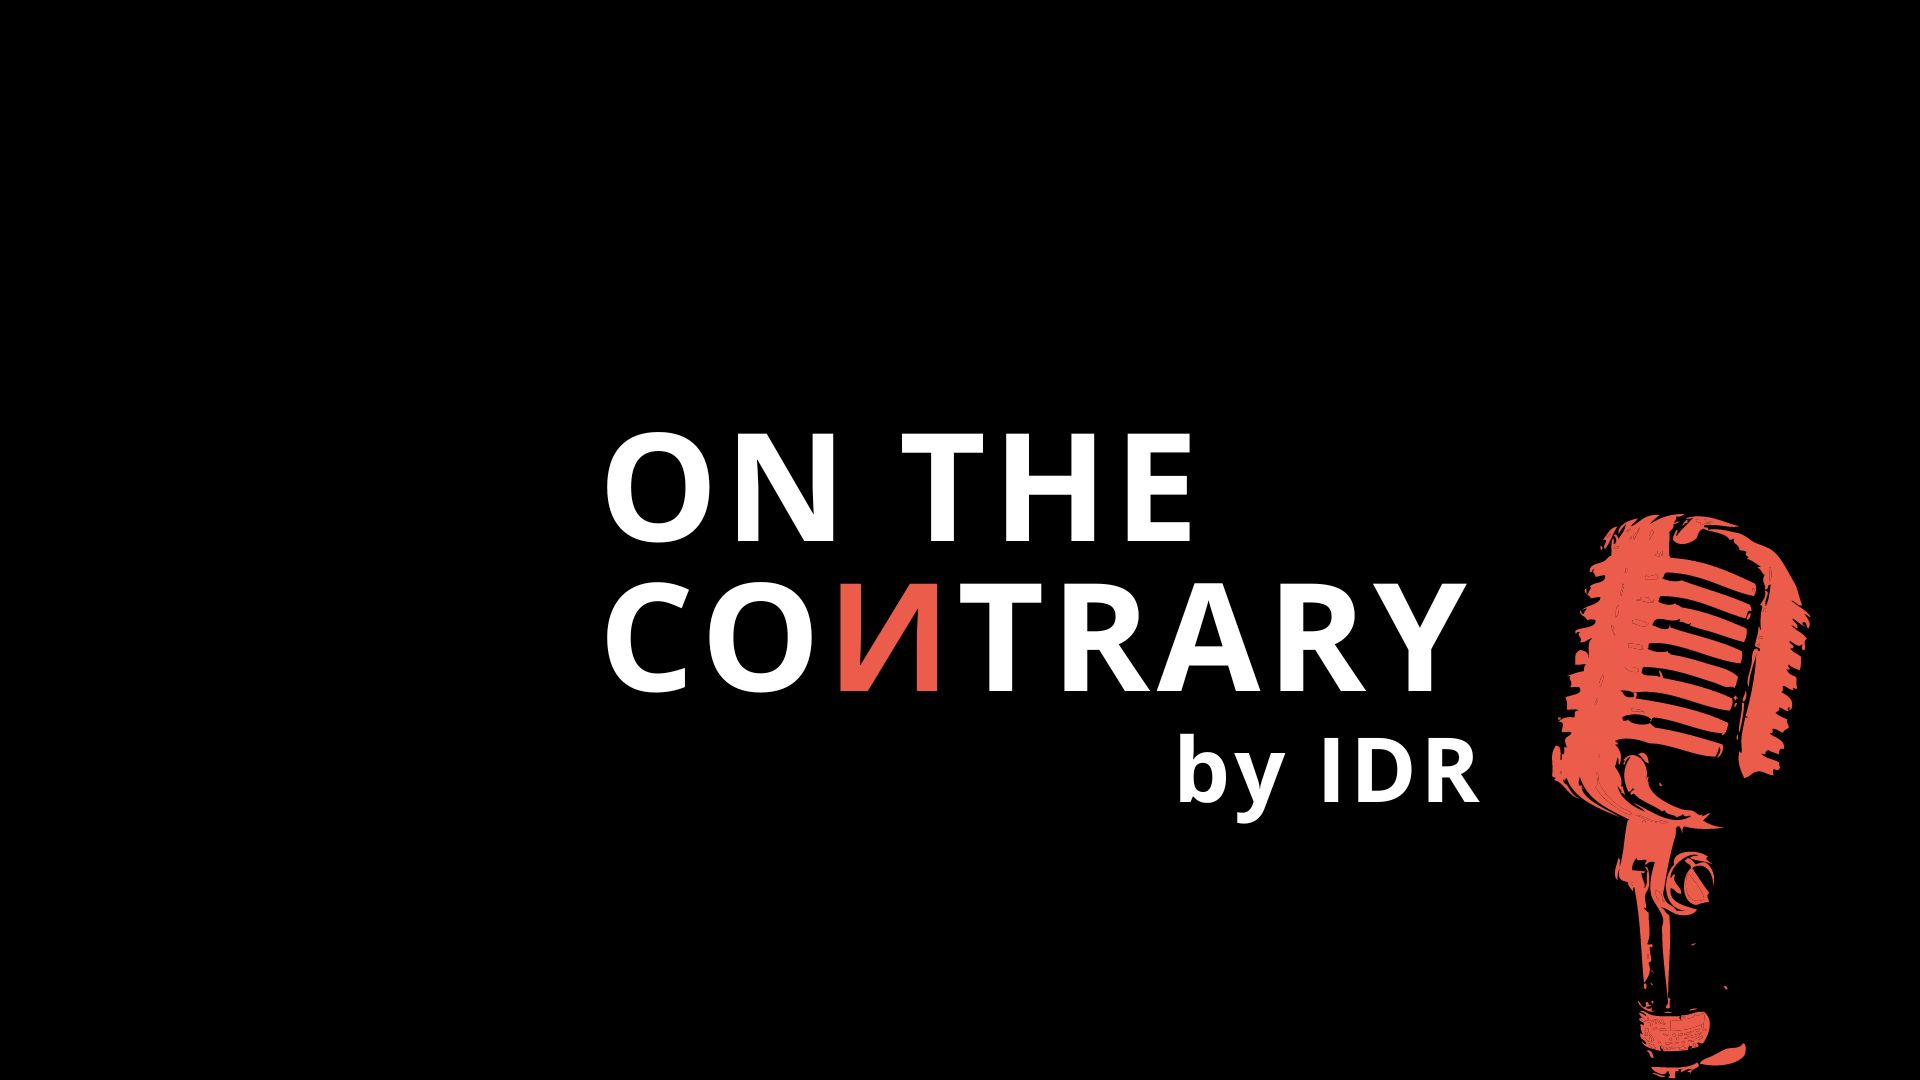 On the contrary by IDR-gender equality